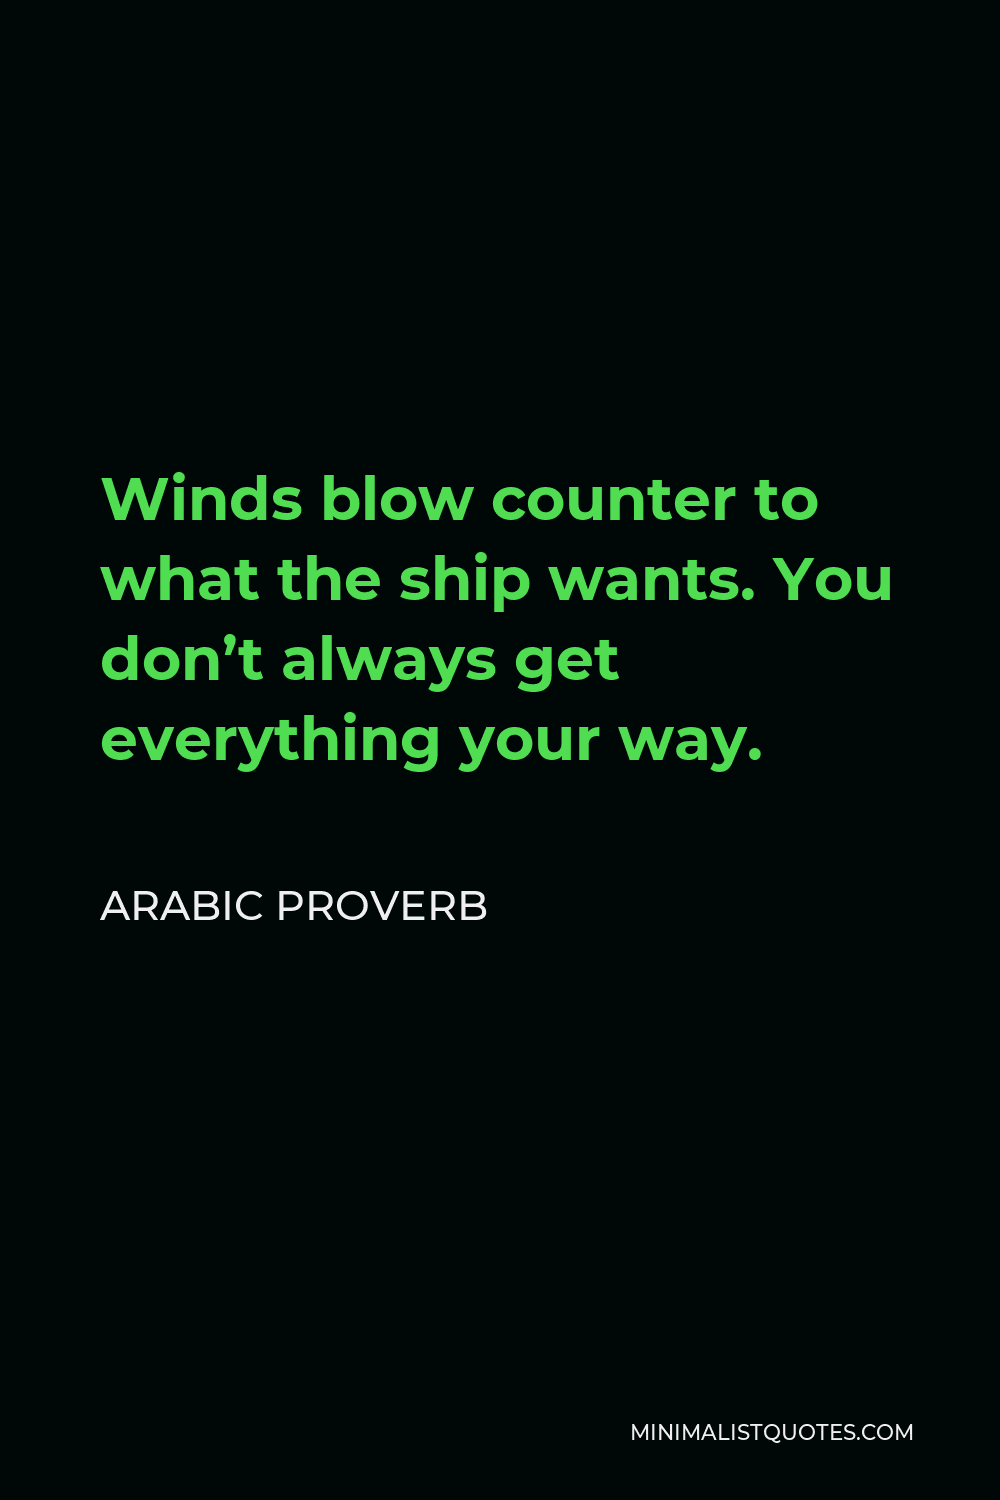 Arabic Proverb Quote - Winds blow counter to what the ship wants. You don’t always get everything your way.